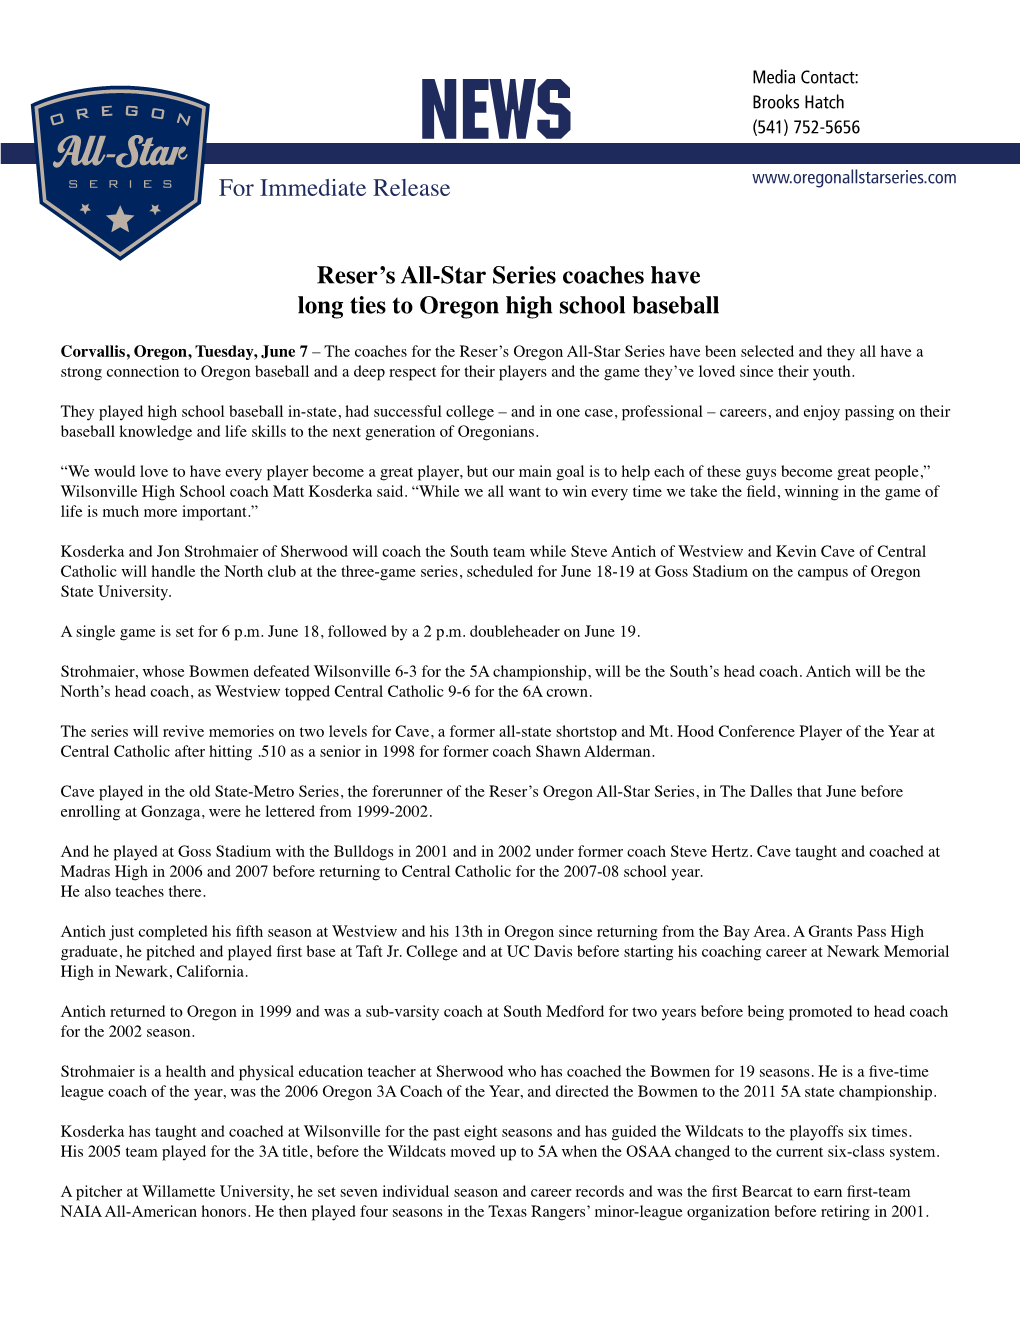 For Immediate Release Reser's All-Star Series Coaches Have Long Ties to Oregon High School Baseball